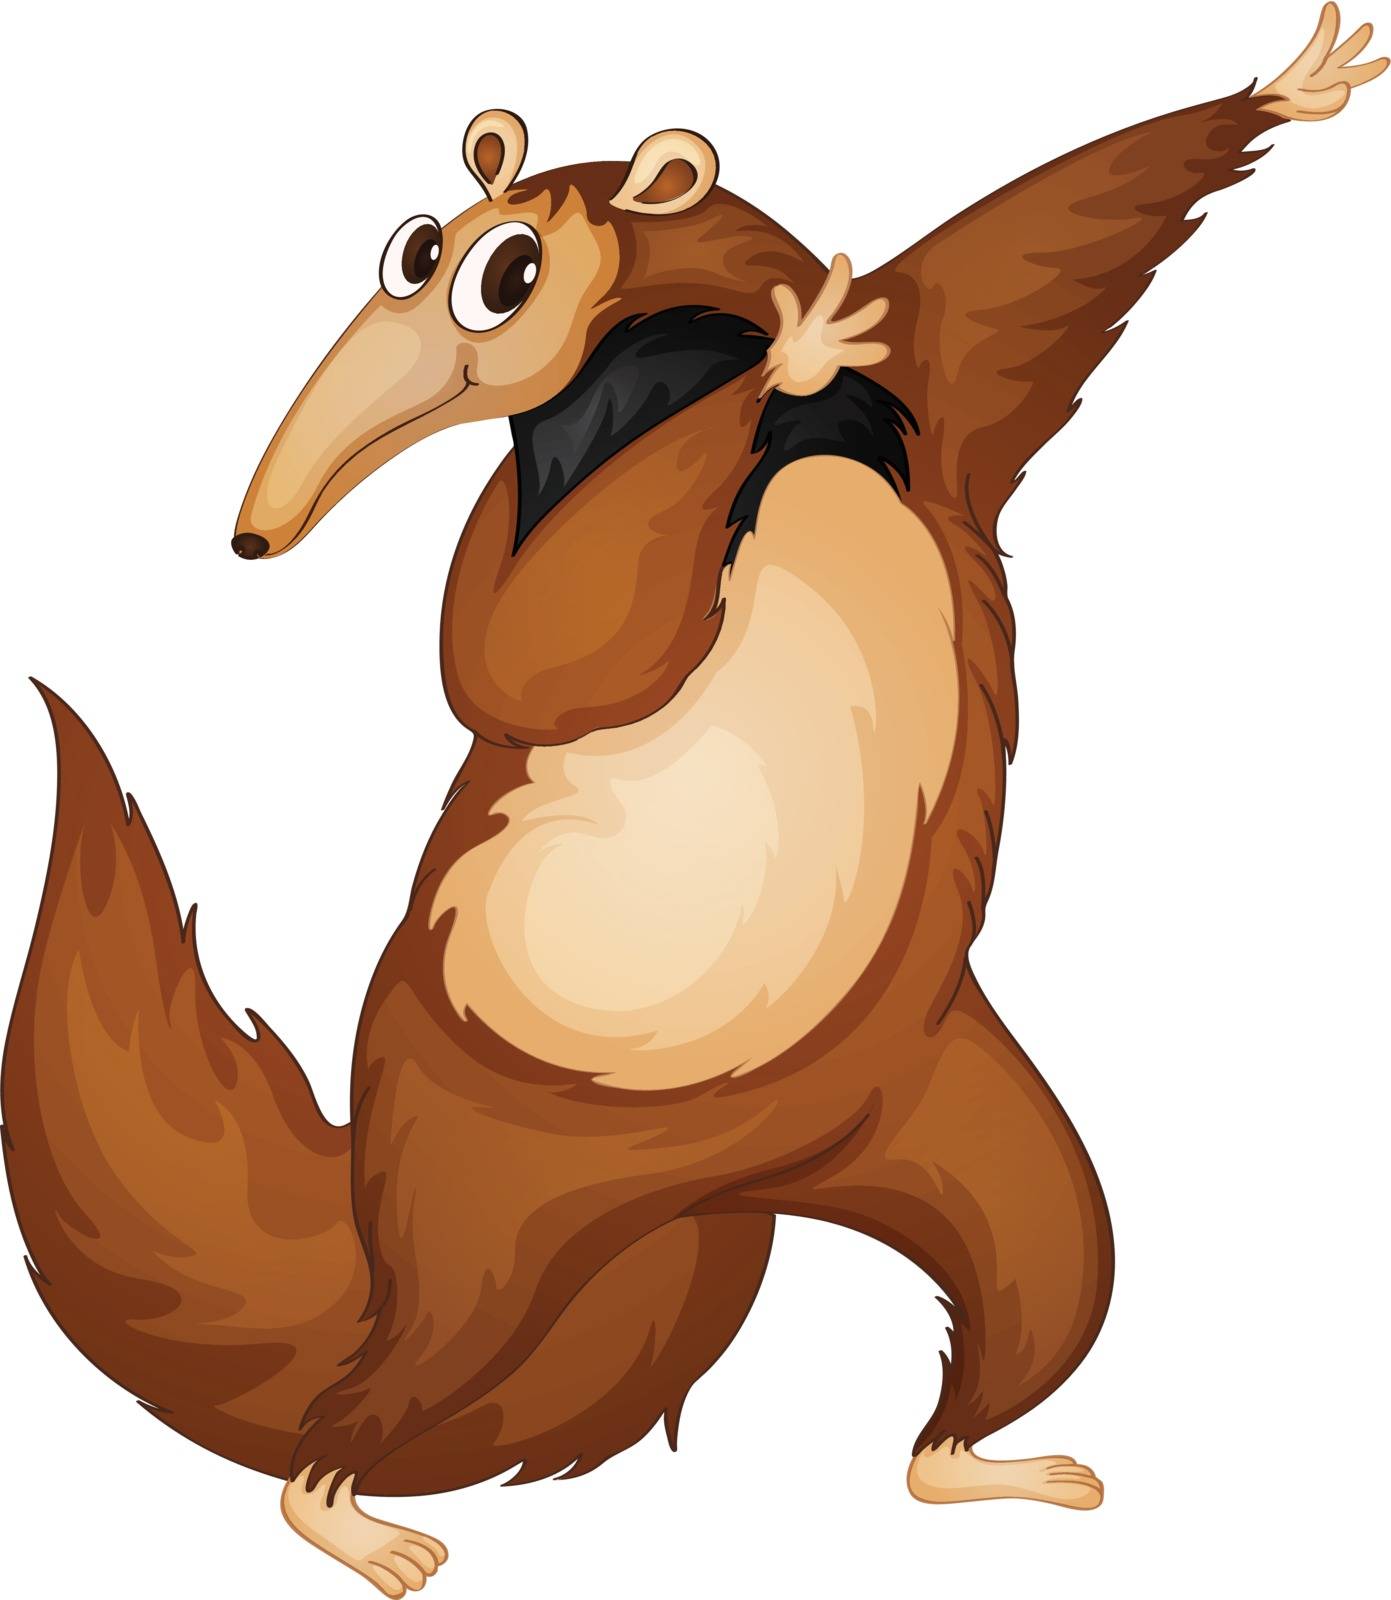 Illustration of a comical anteater